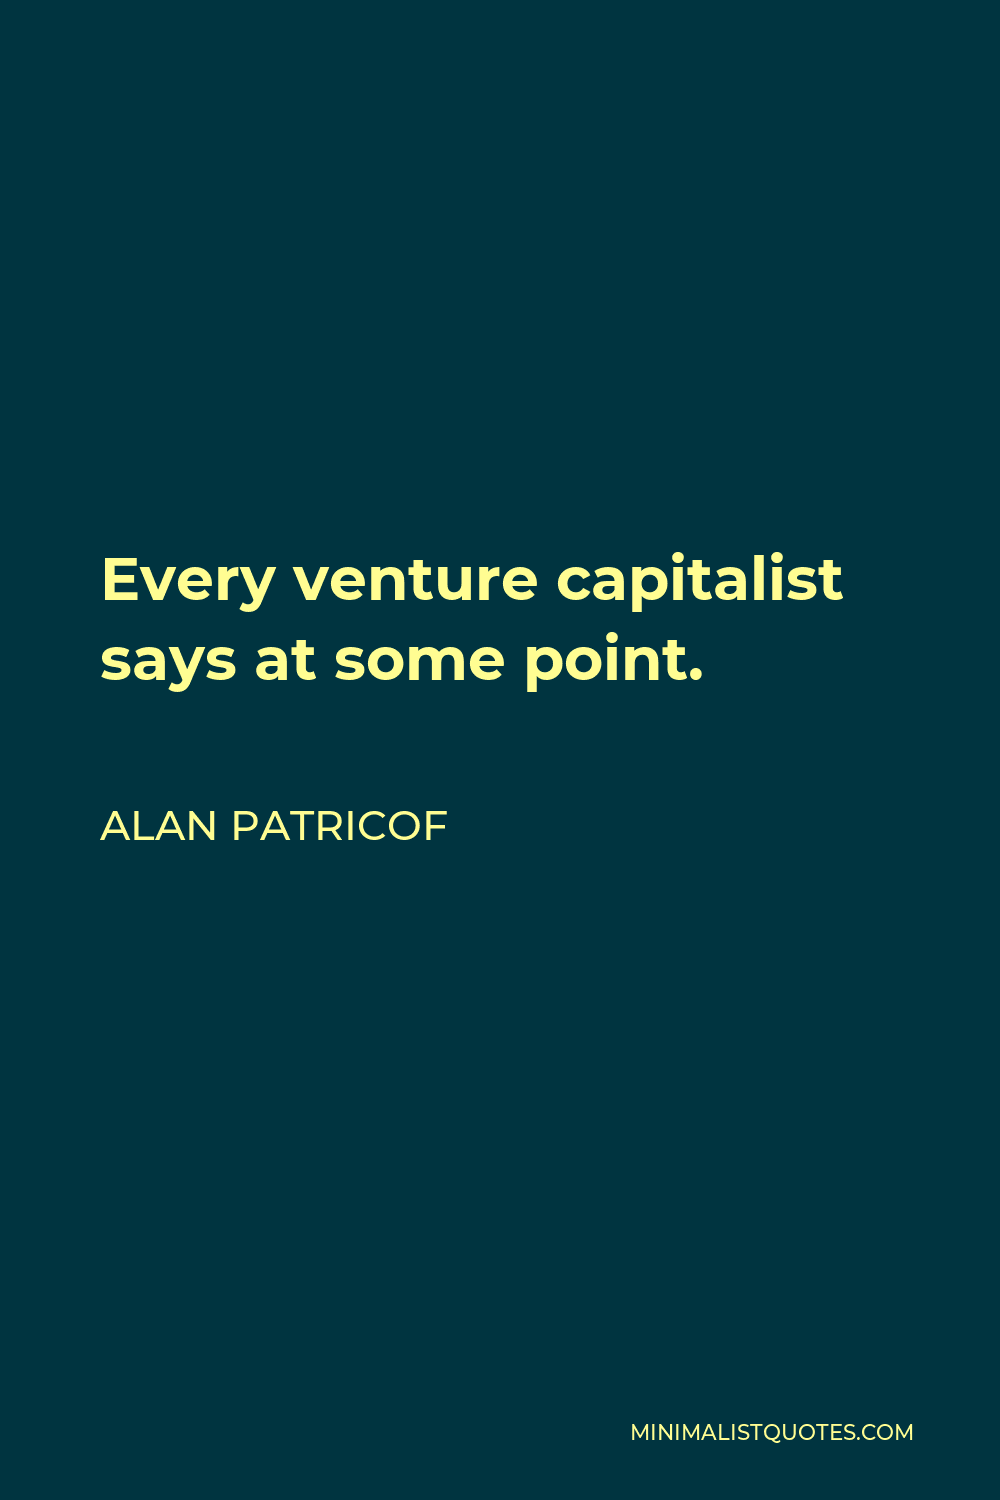 Alan Patricof Quote - Every venture capitalist says at some point.